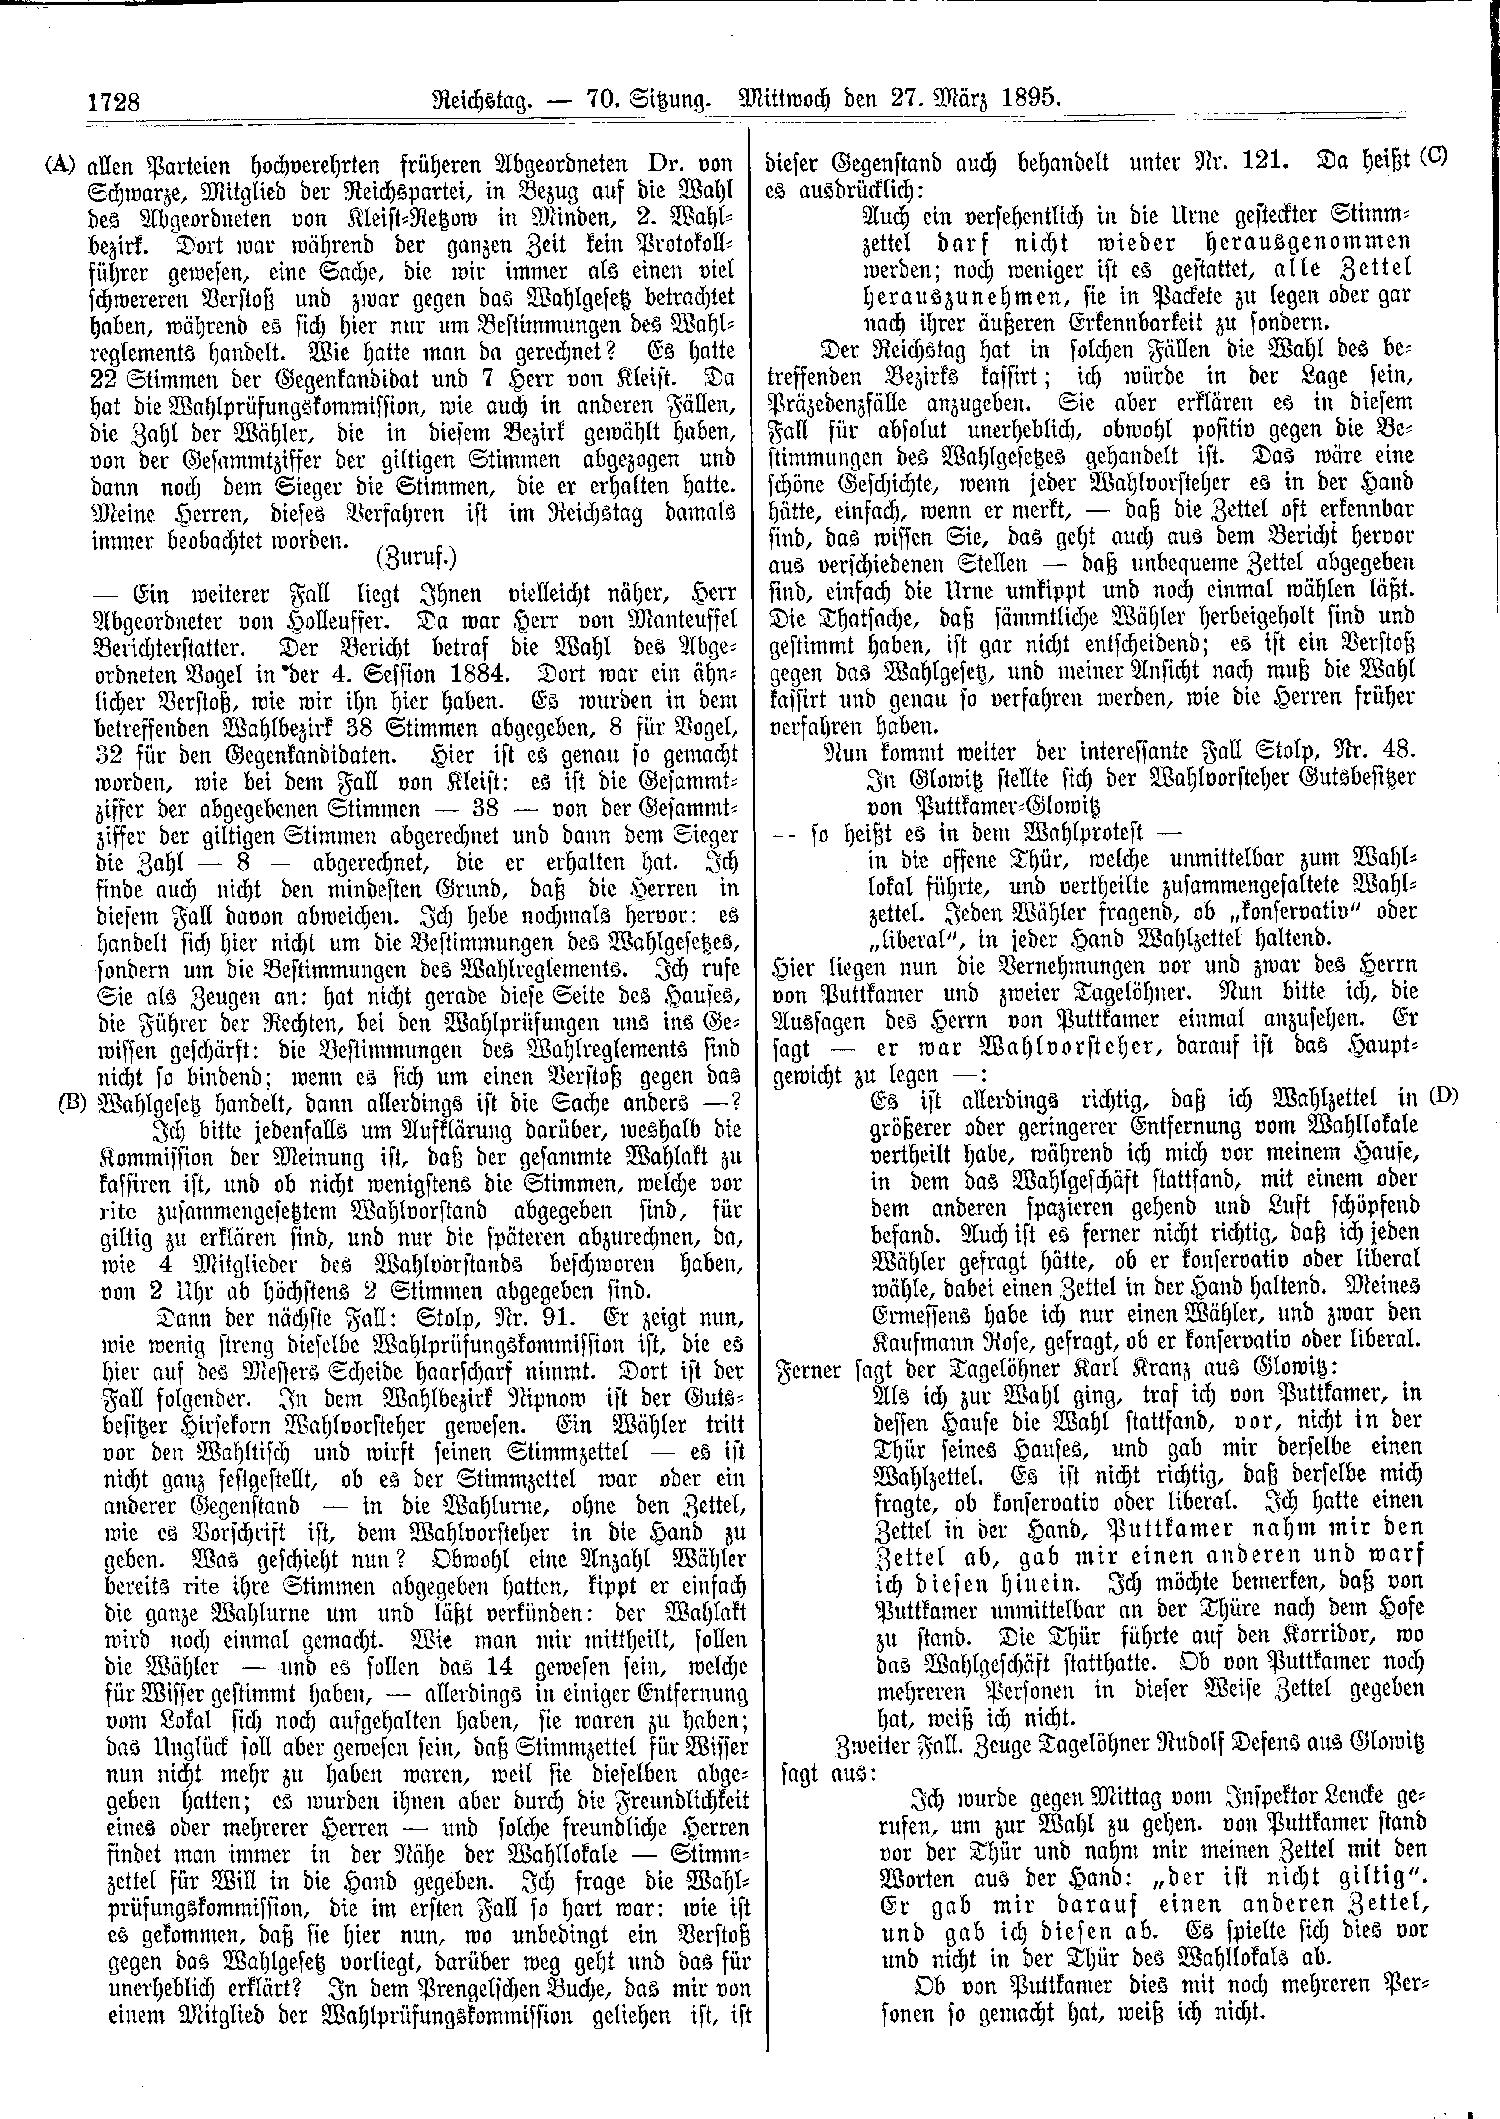 Scan of page 1728